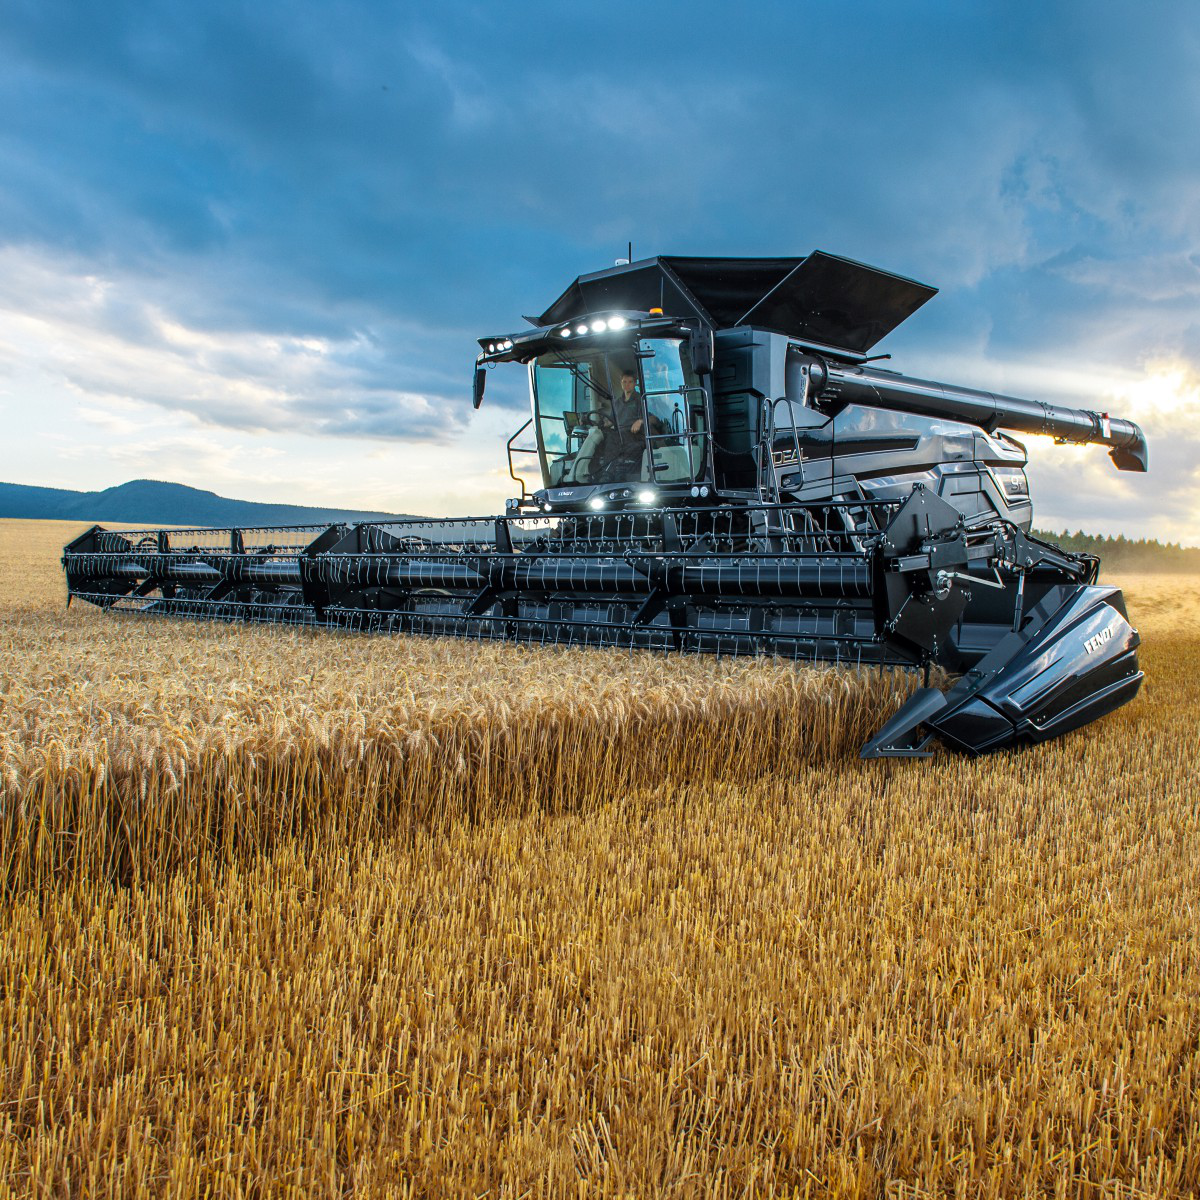 Ideal Combine Harvester by Morten Leth Bilde and Patrick Lorriette Platinum Agricultural Tools, Farming Equipment and Machinery Design Award Winner 2019 